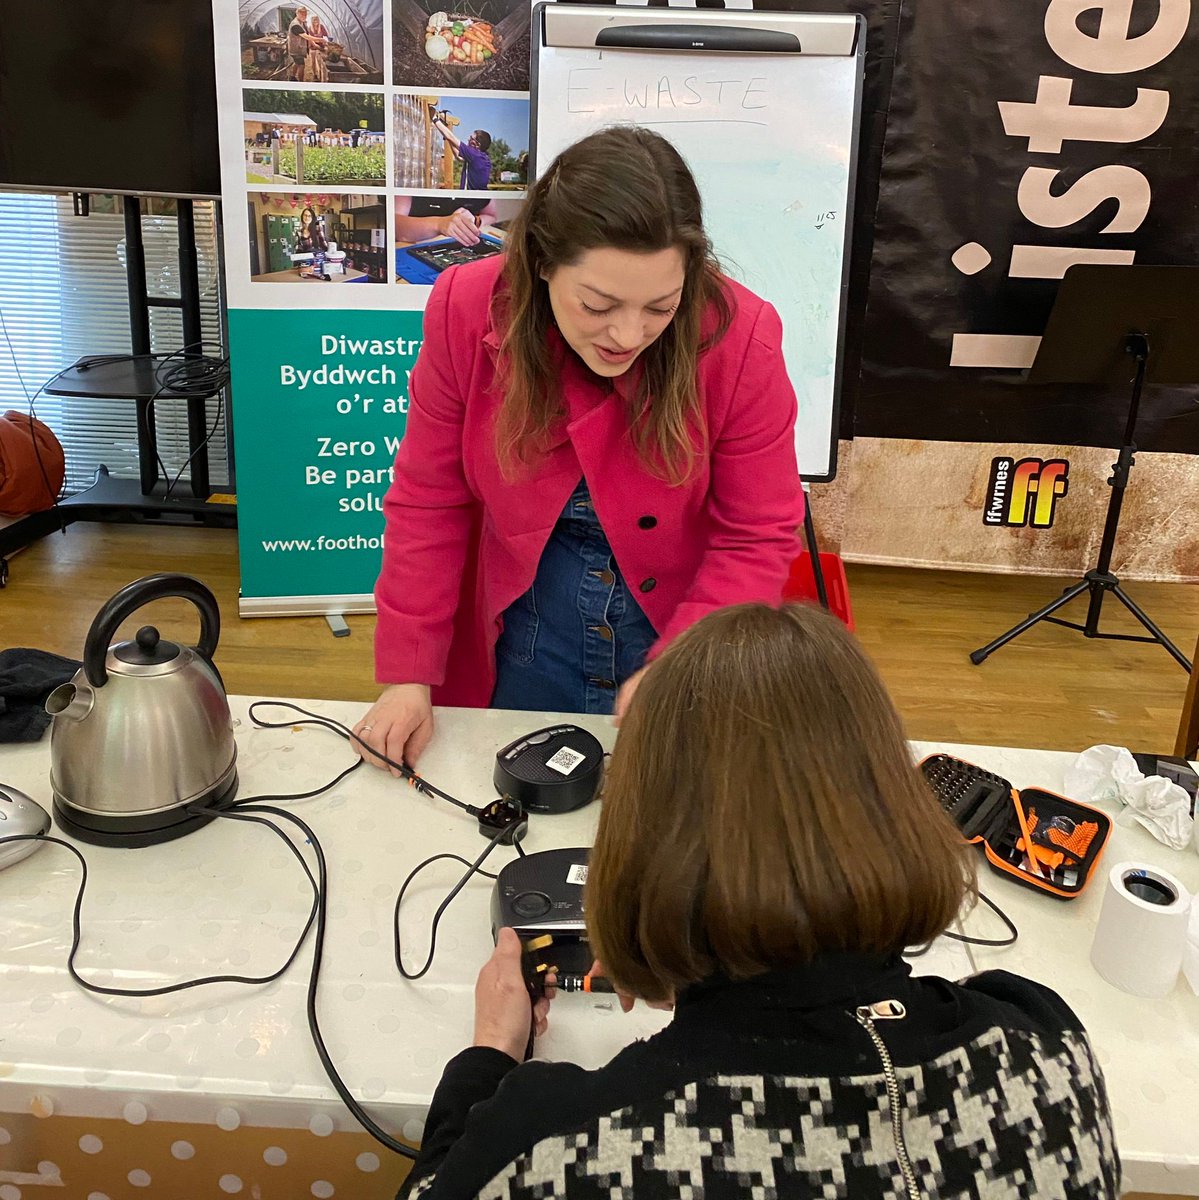 The #BrightSparks team has been busy running several E-waste Pop Up awareness events at community groups in #Llanelli. Last month the team visited the #LlaneliMulticulturalNetwork to discuss #EWaste and the challenges it poses to our #environment @hubbubUK #RepairReuseRecycle